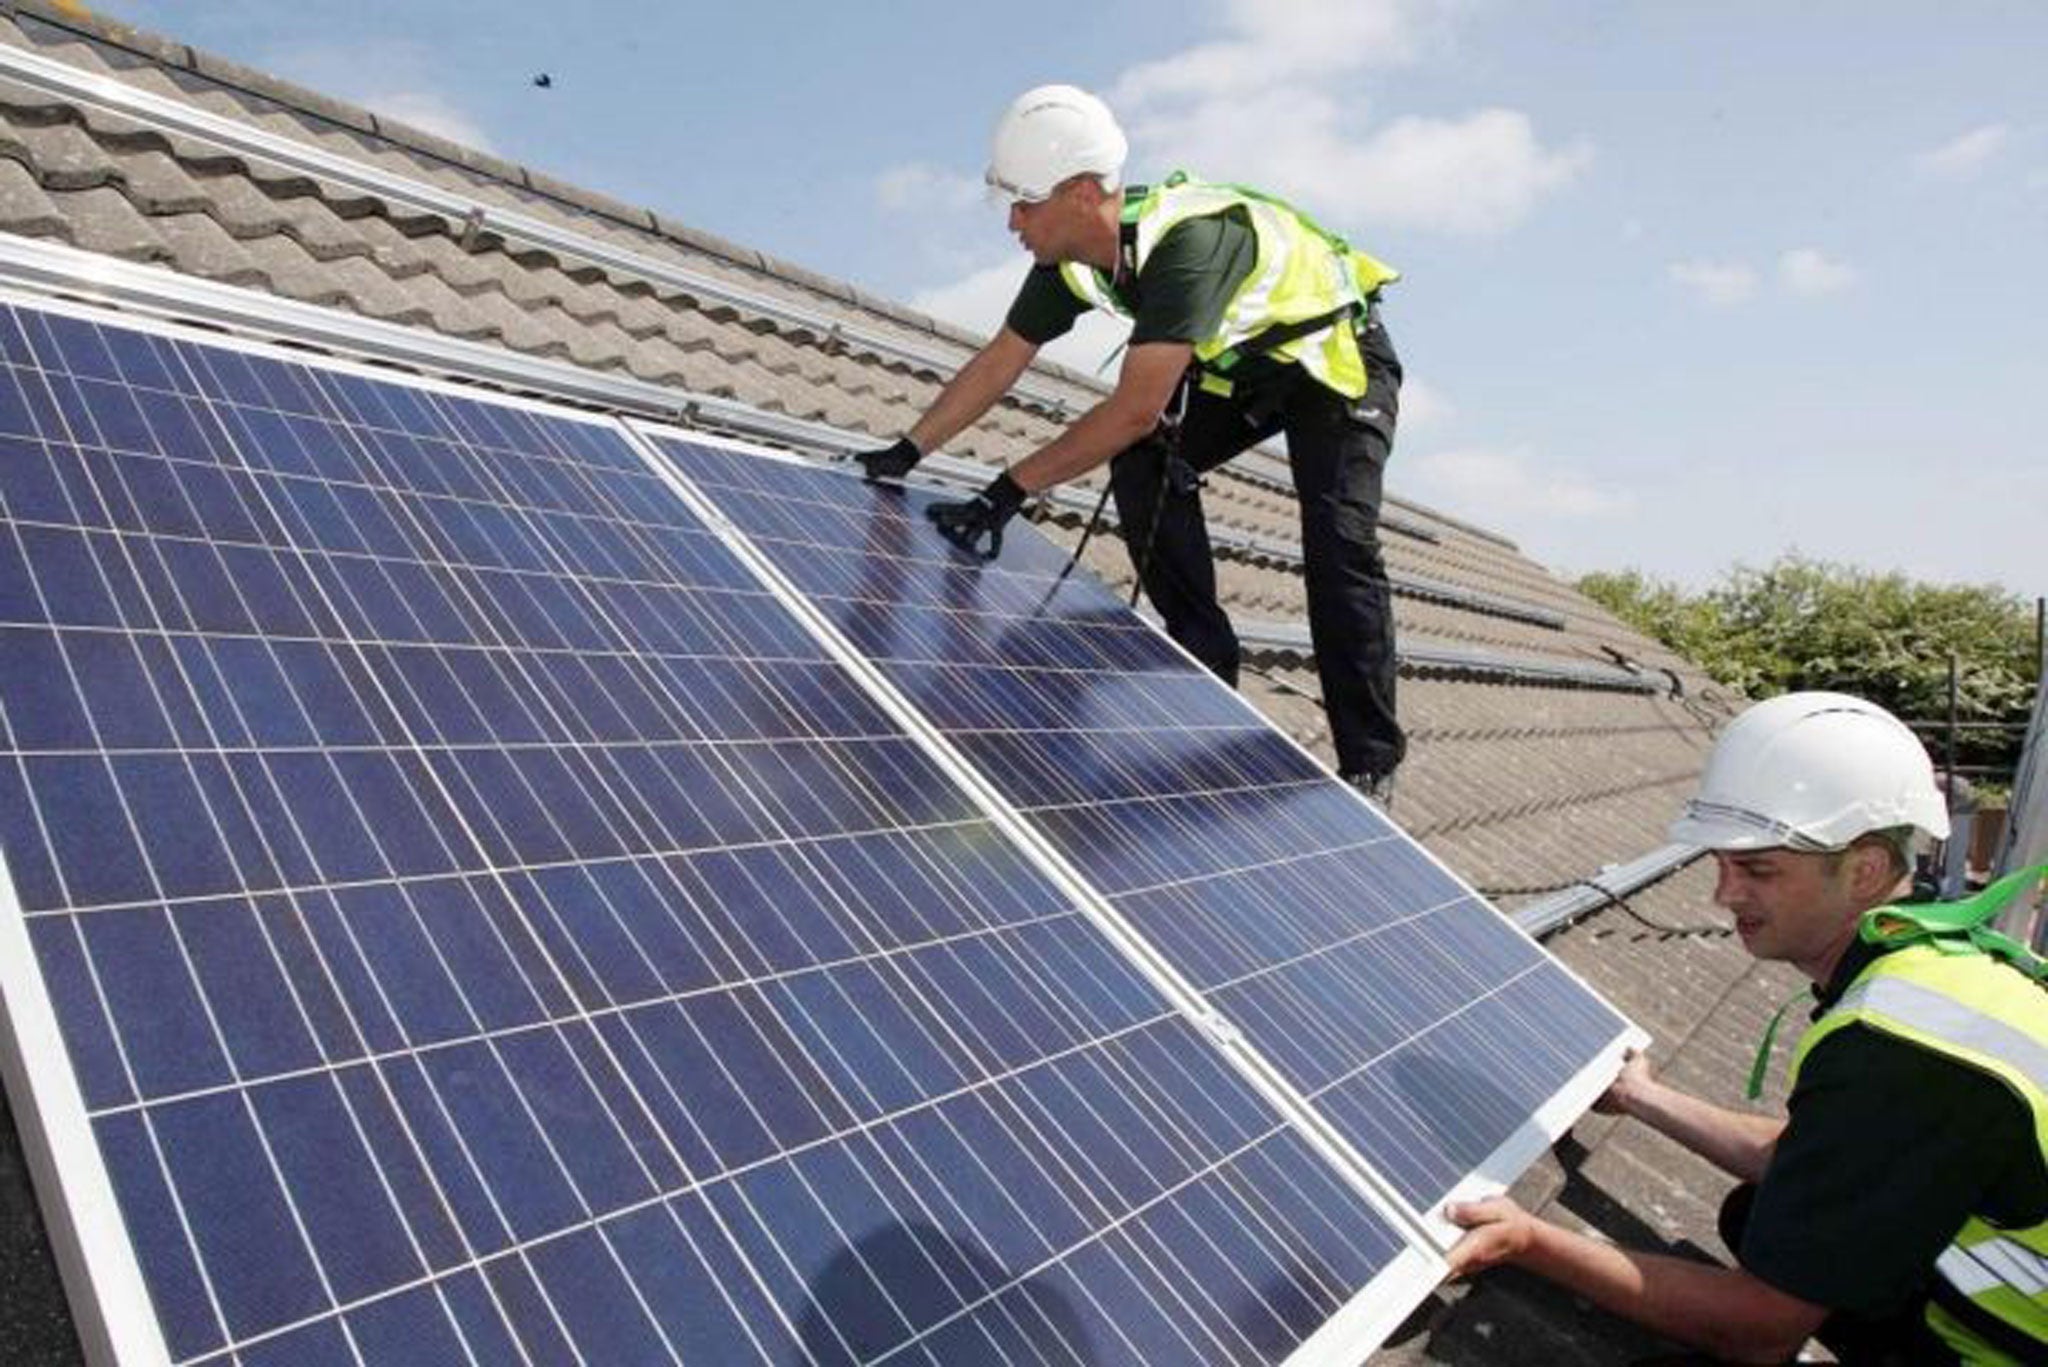 Solar panels are included in the Government's deal, aimed at reducing household costs and wastage